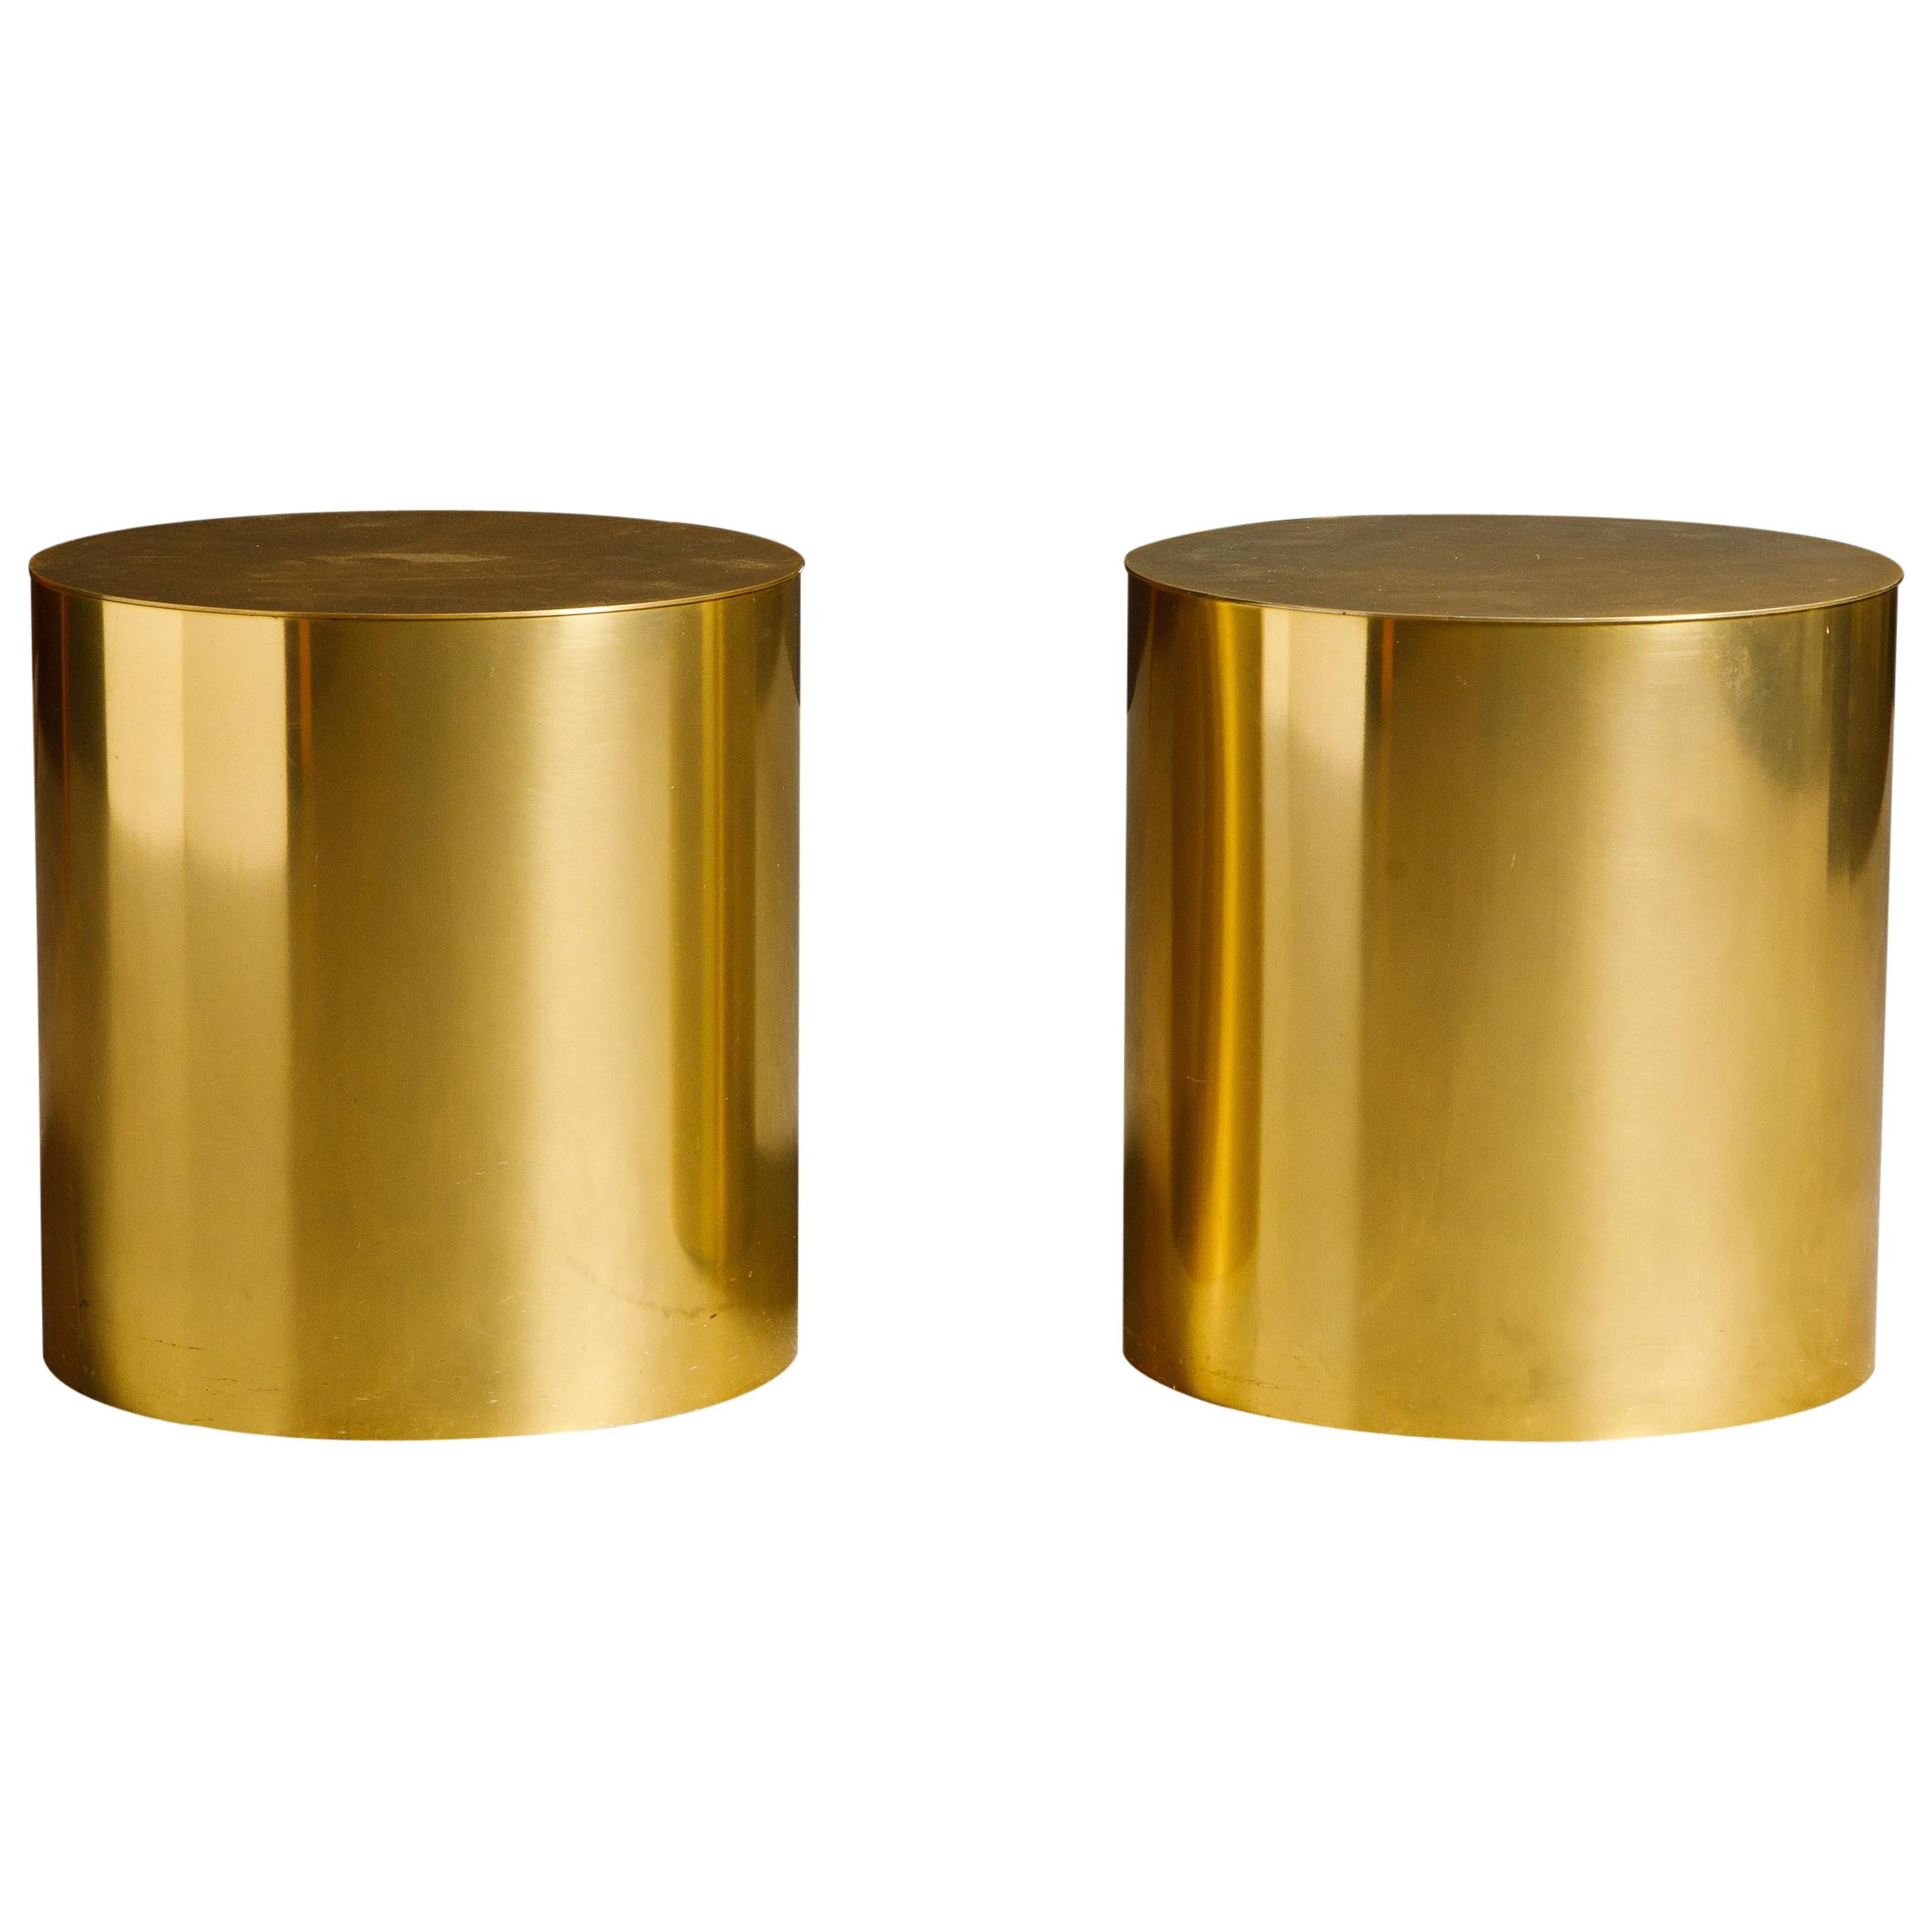 Pair of Brass Cylinder Drum Side Tables, circa 1970s, Made in England